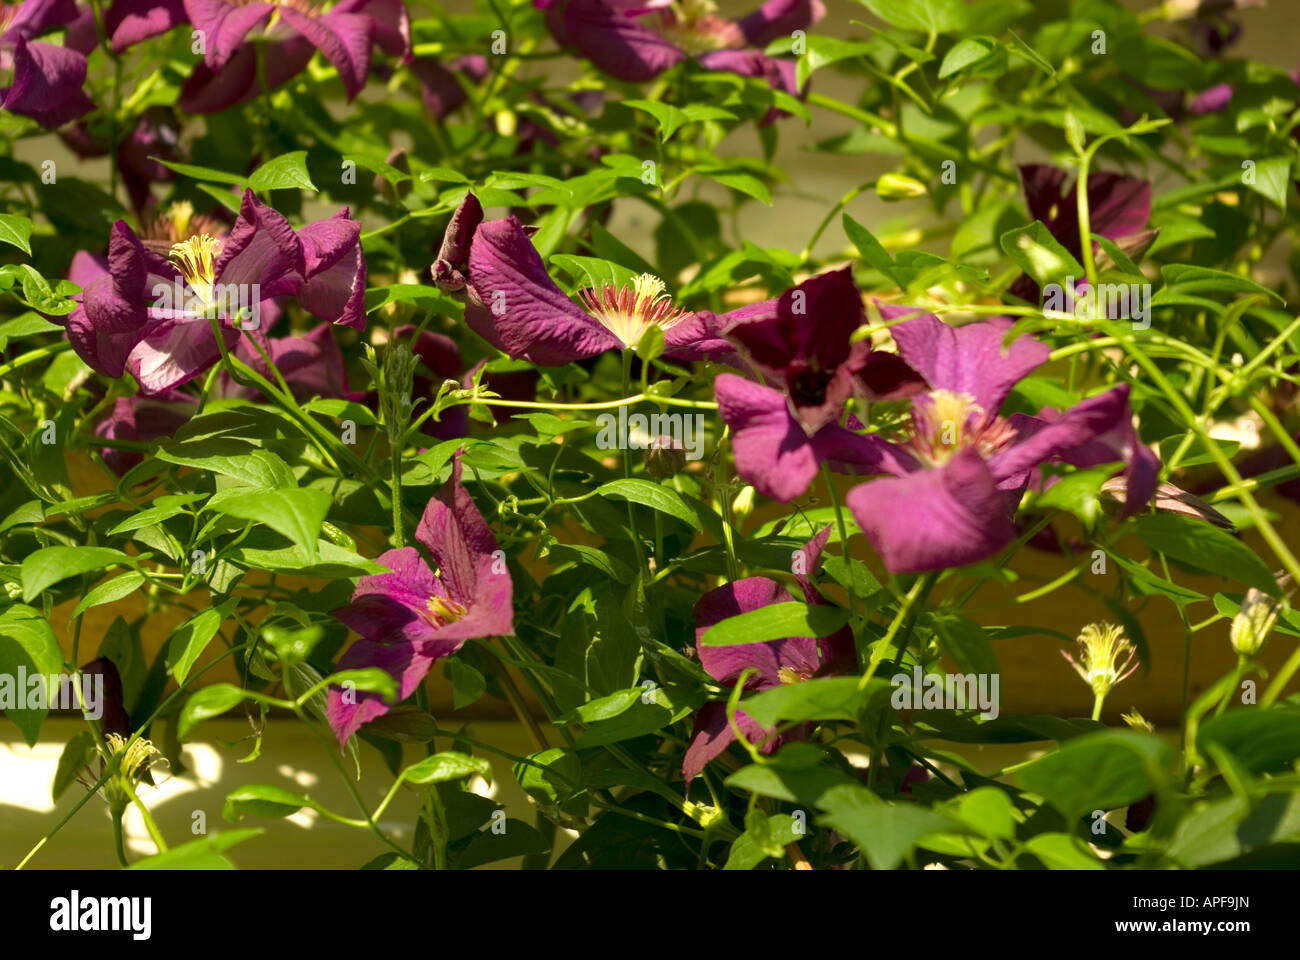 Clematis Klematis flowers in blossom Stock Photo